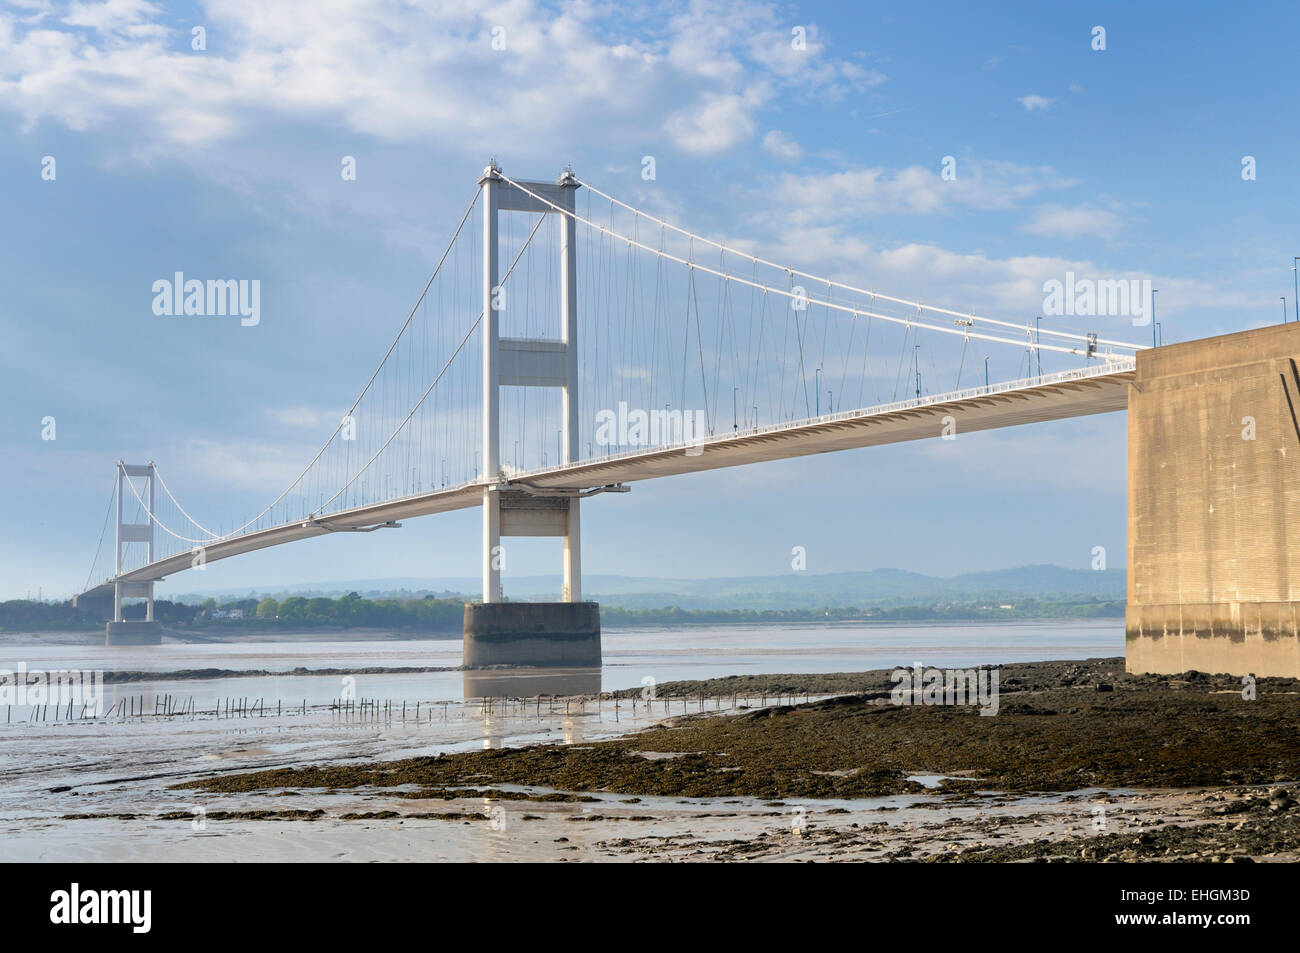 The older Severn suspension bridge spanning the Severn estuary at low tide on a sunny day Stock Photo